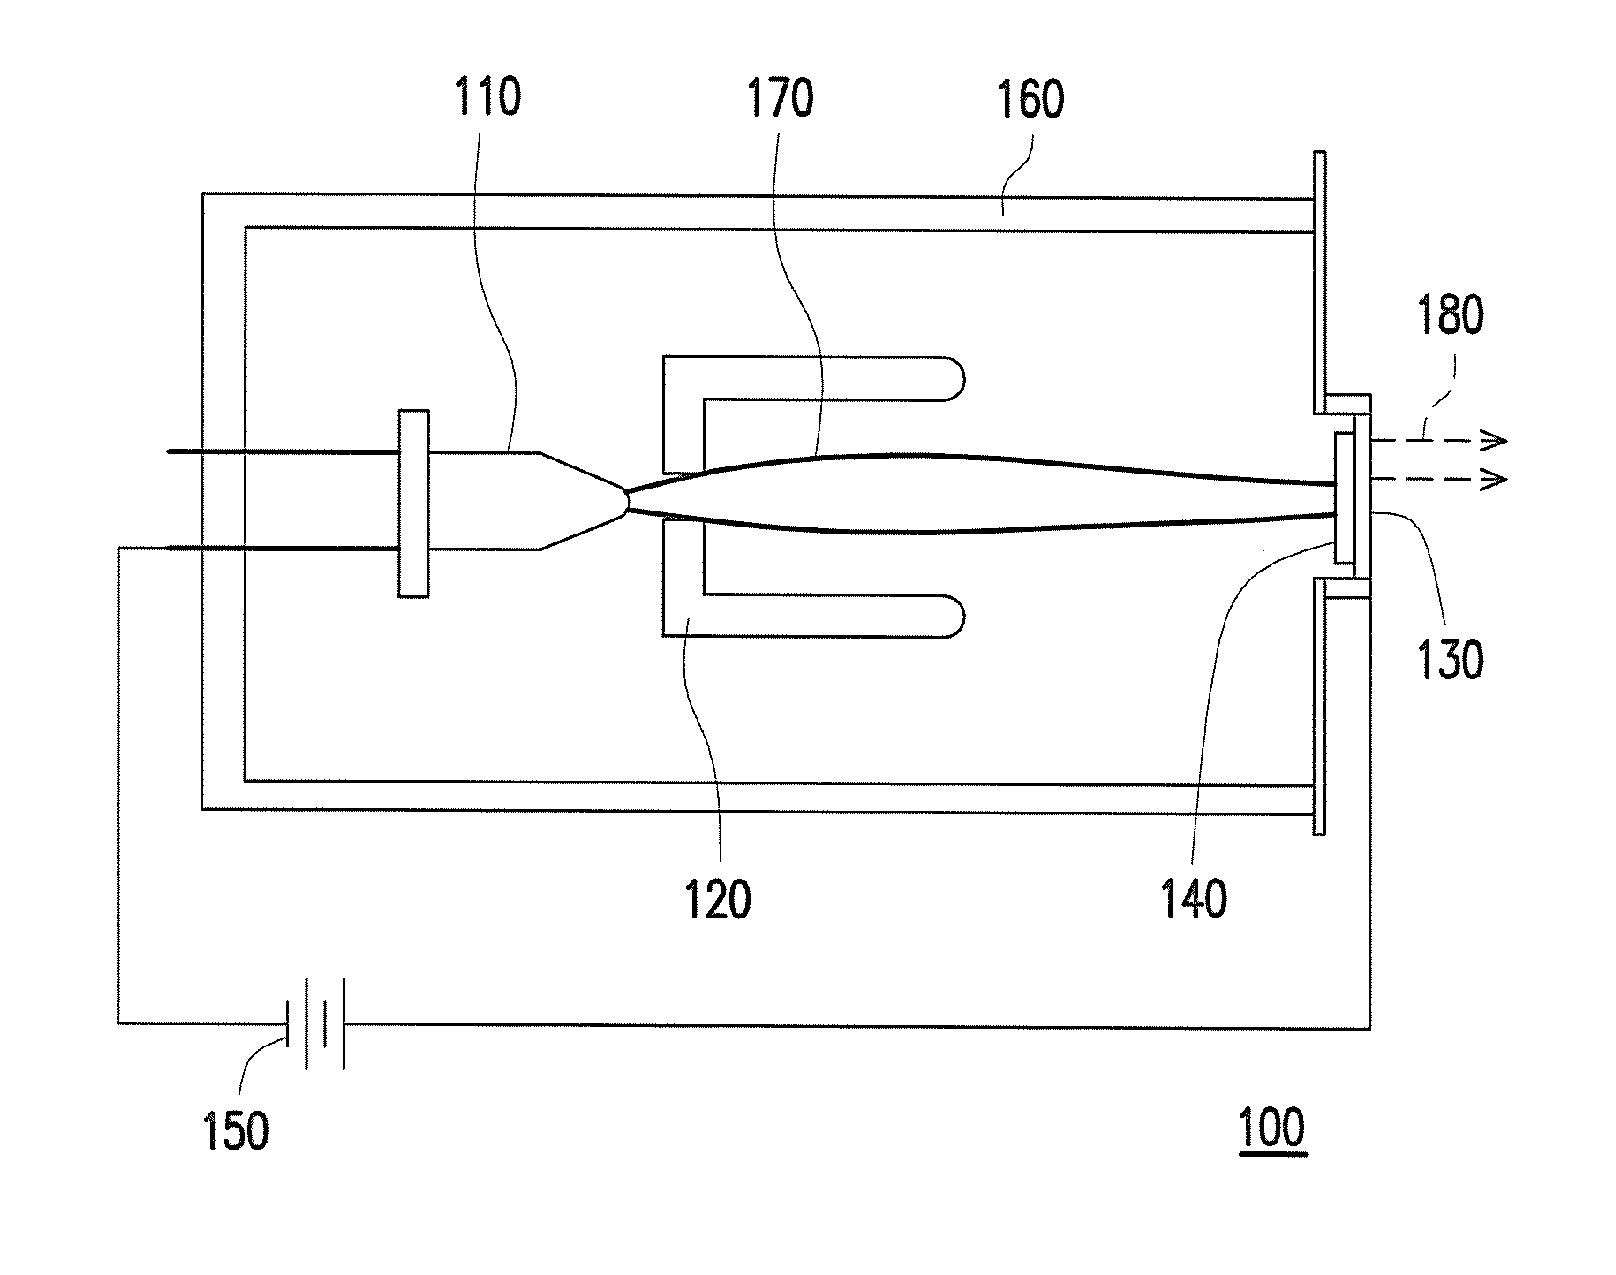 Composite target and x-ray tube with the composite target